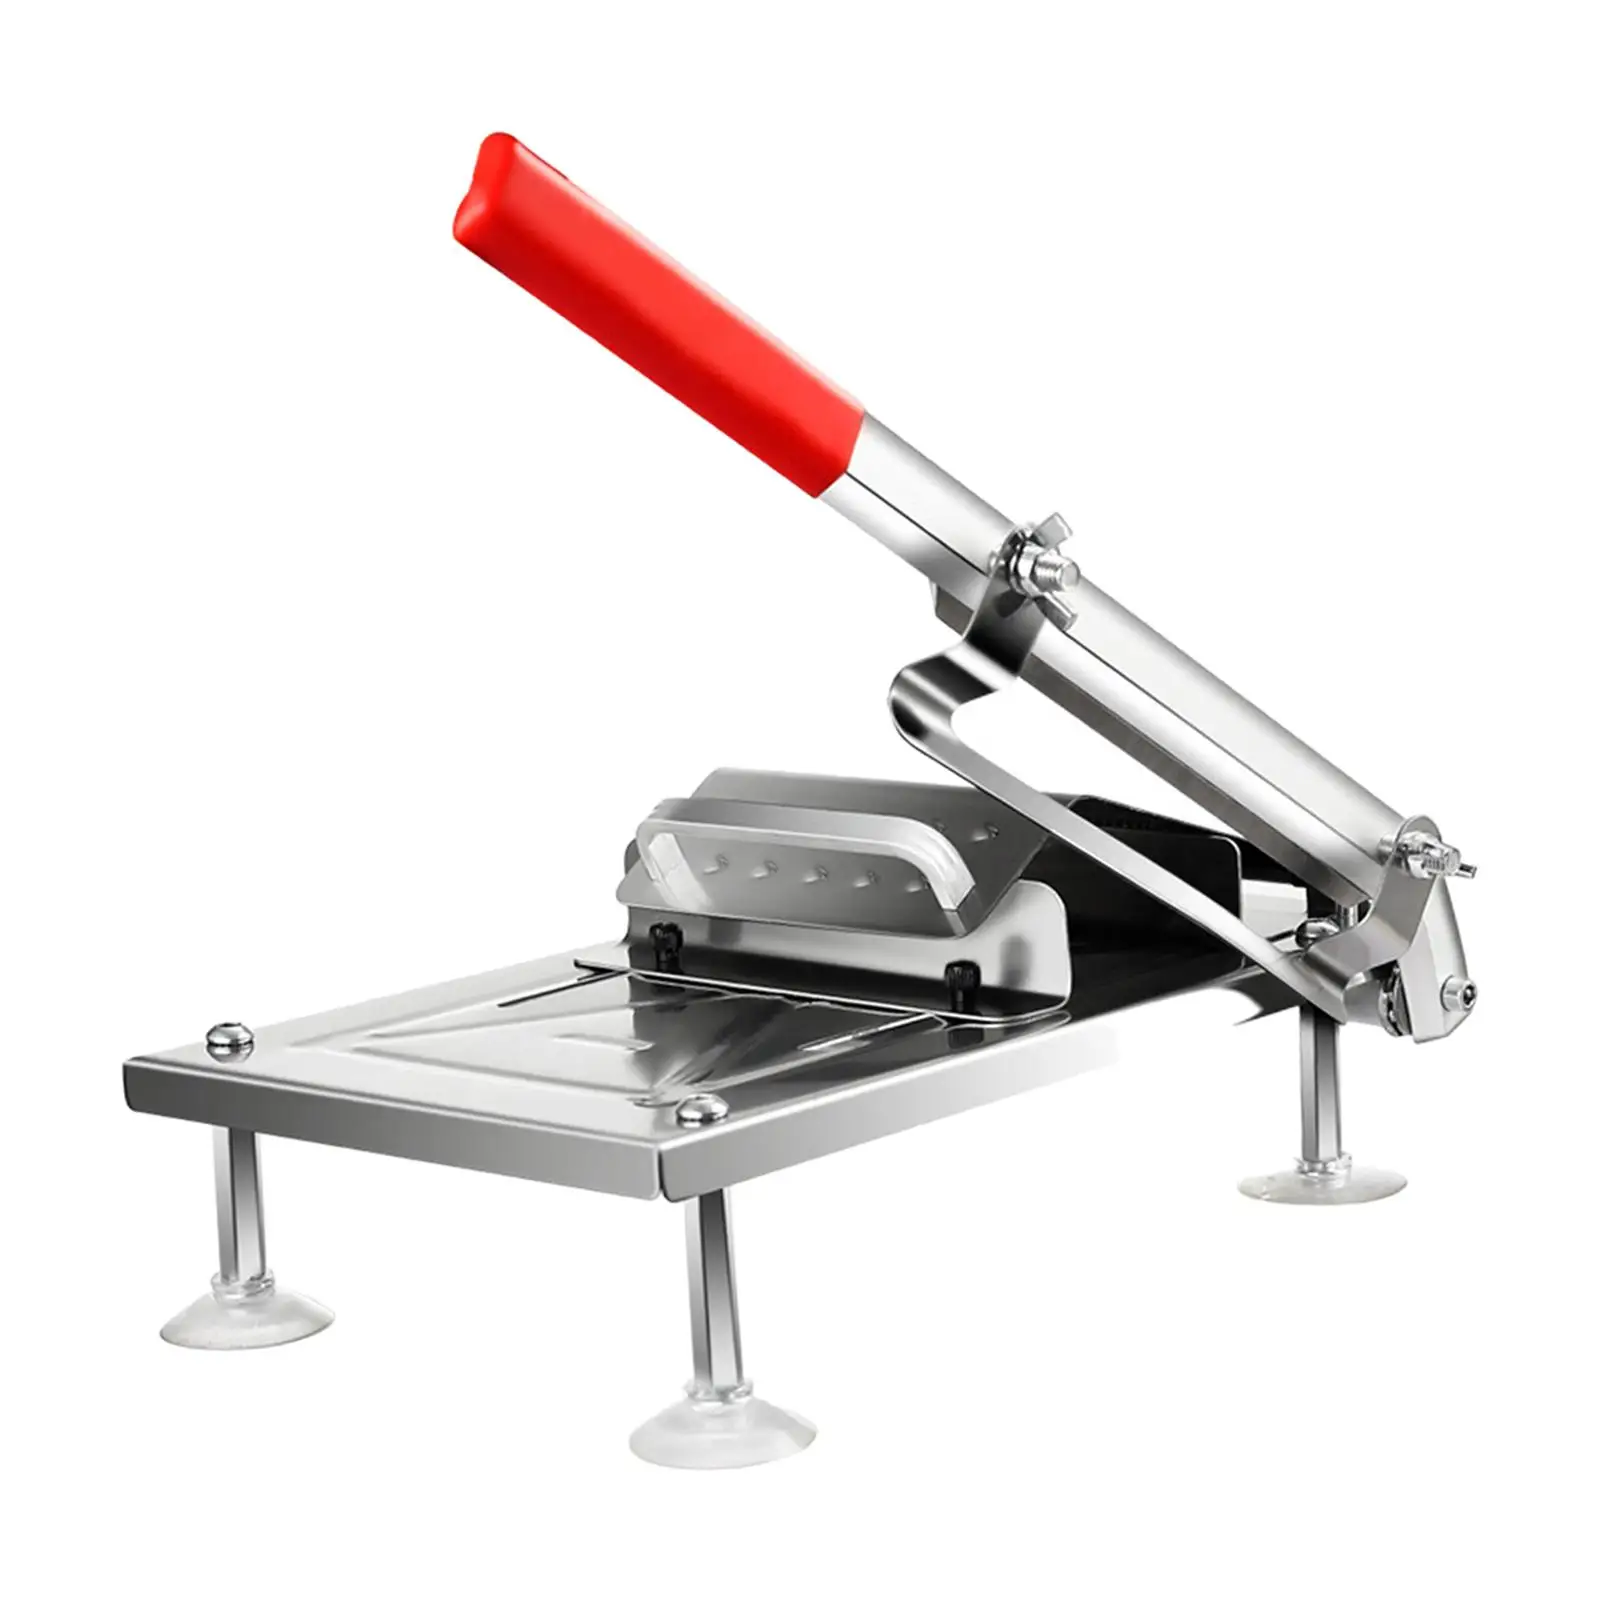 Manual Frozen Meat Slicer Meat Cutter Roll Meat Cleavers Roll Slicing Cleavers for Commercial Cooking Fruits Hotpot BBQ Shabu